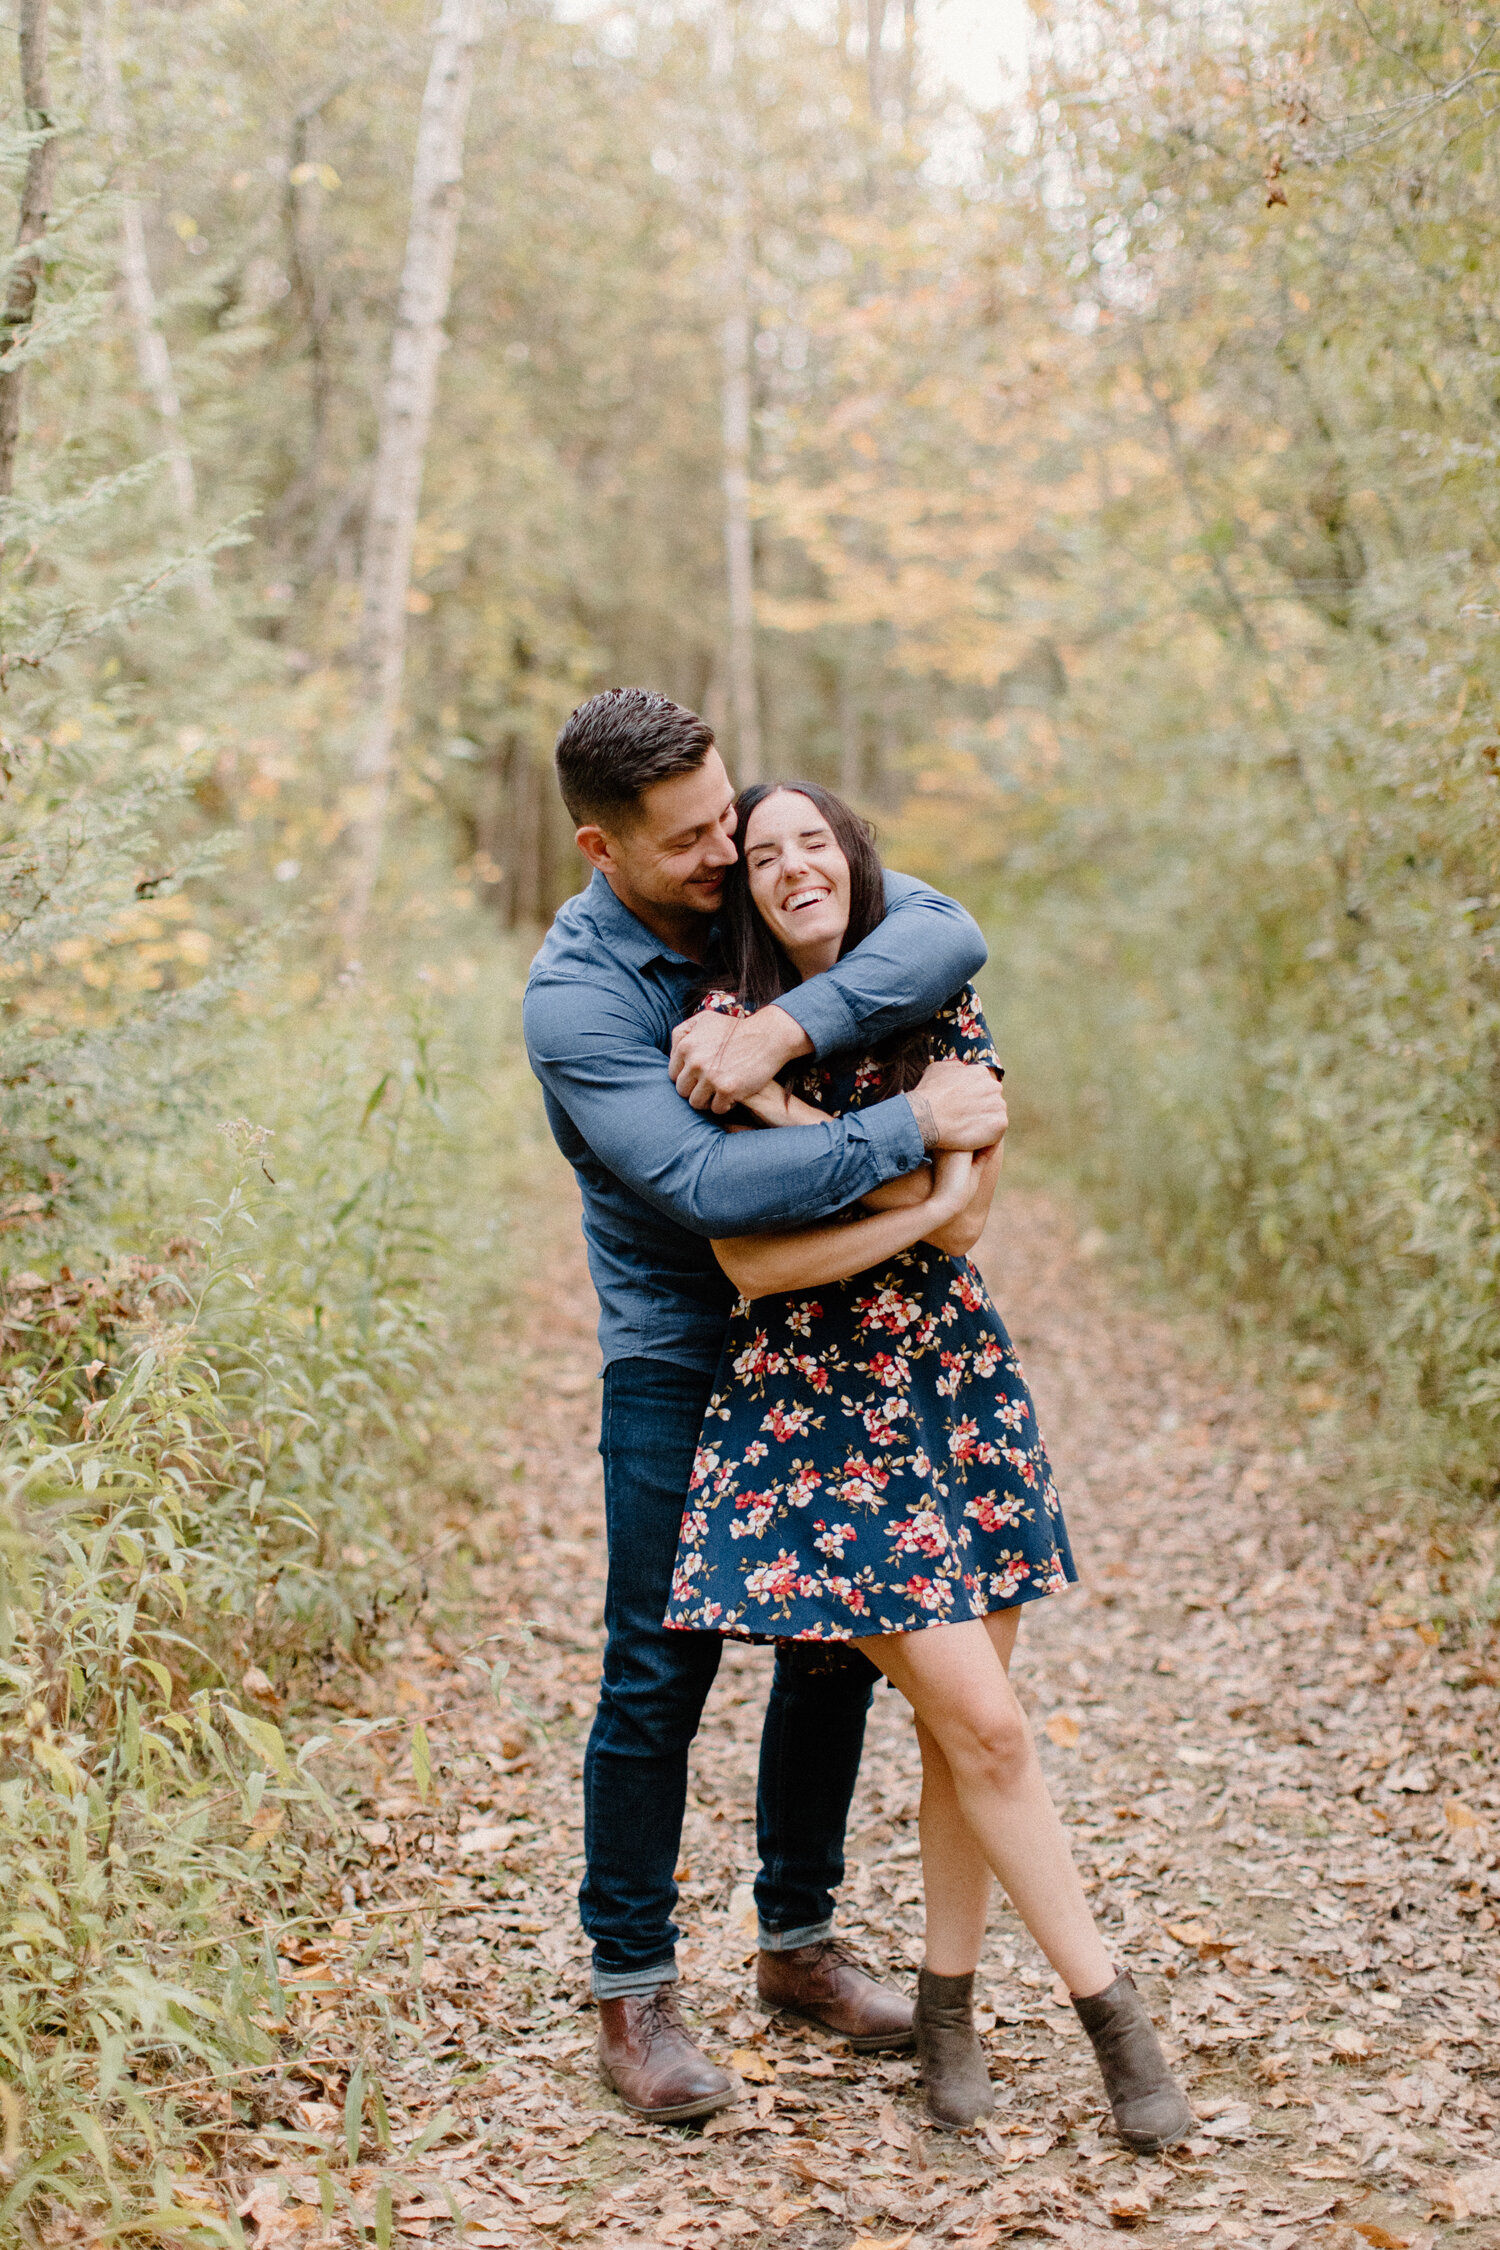  Chelsea Mason Photography captures a playful moment between this engaged couple as they wrap their arms around one another and laugh during this photo session in Brockville, Ontario. wooded pathway brockville ontario autumn engagement session photos